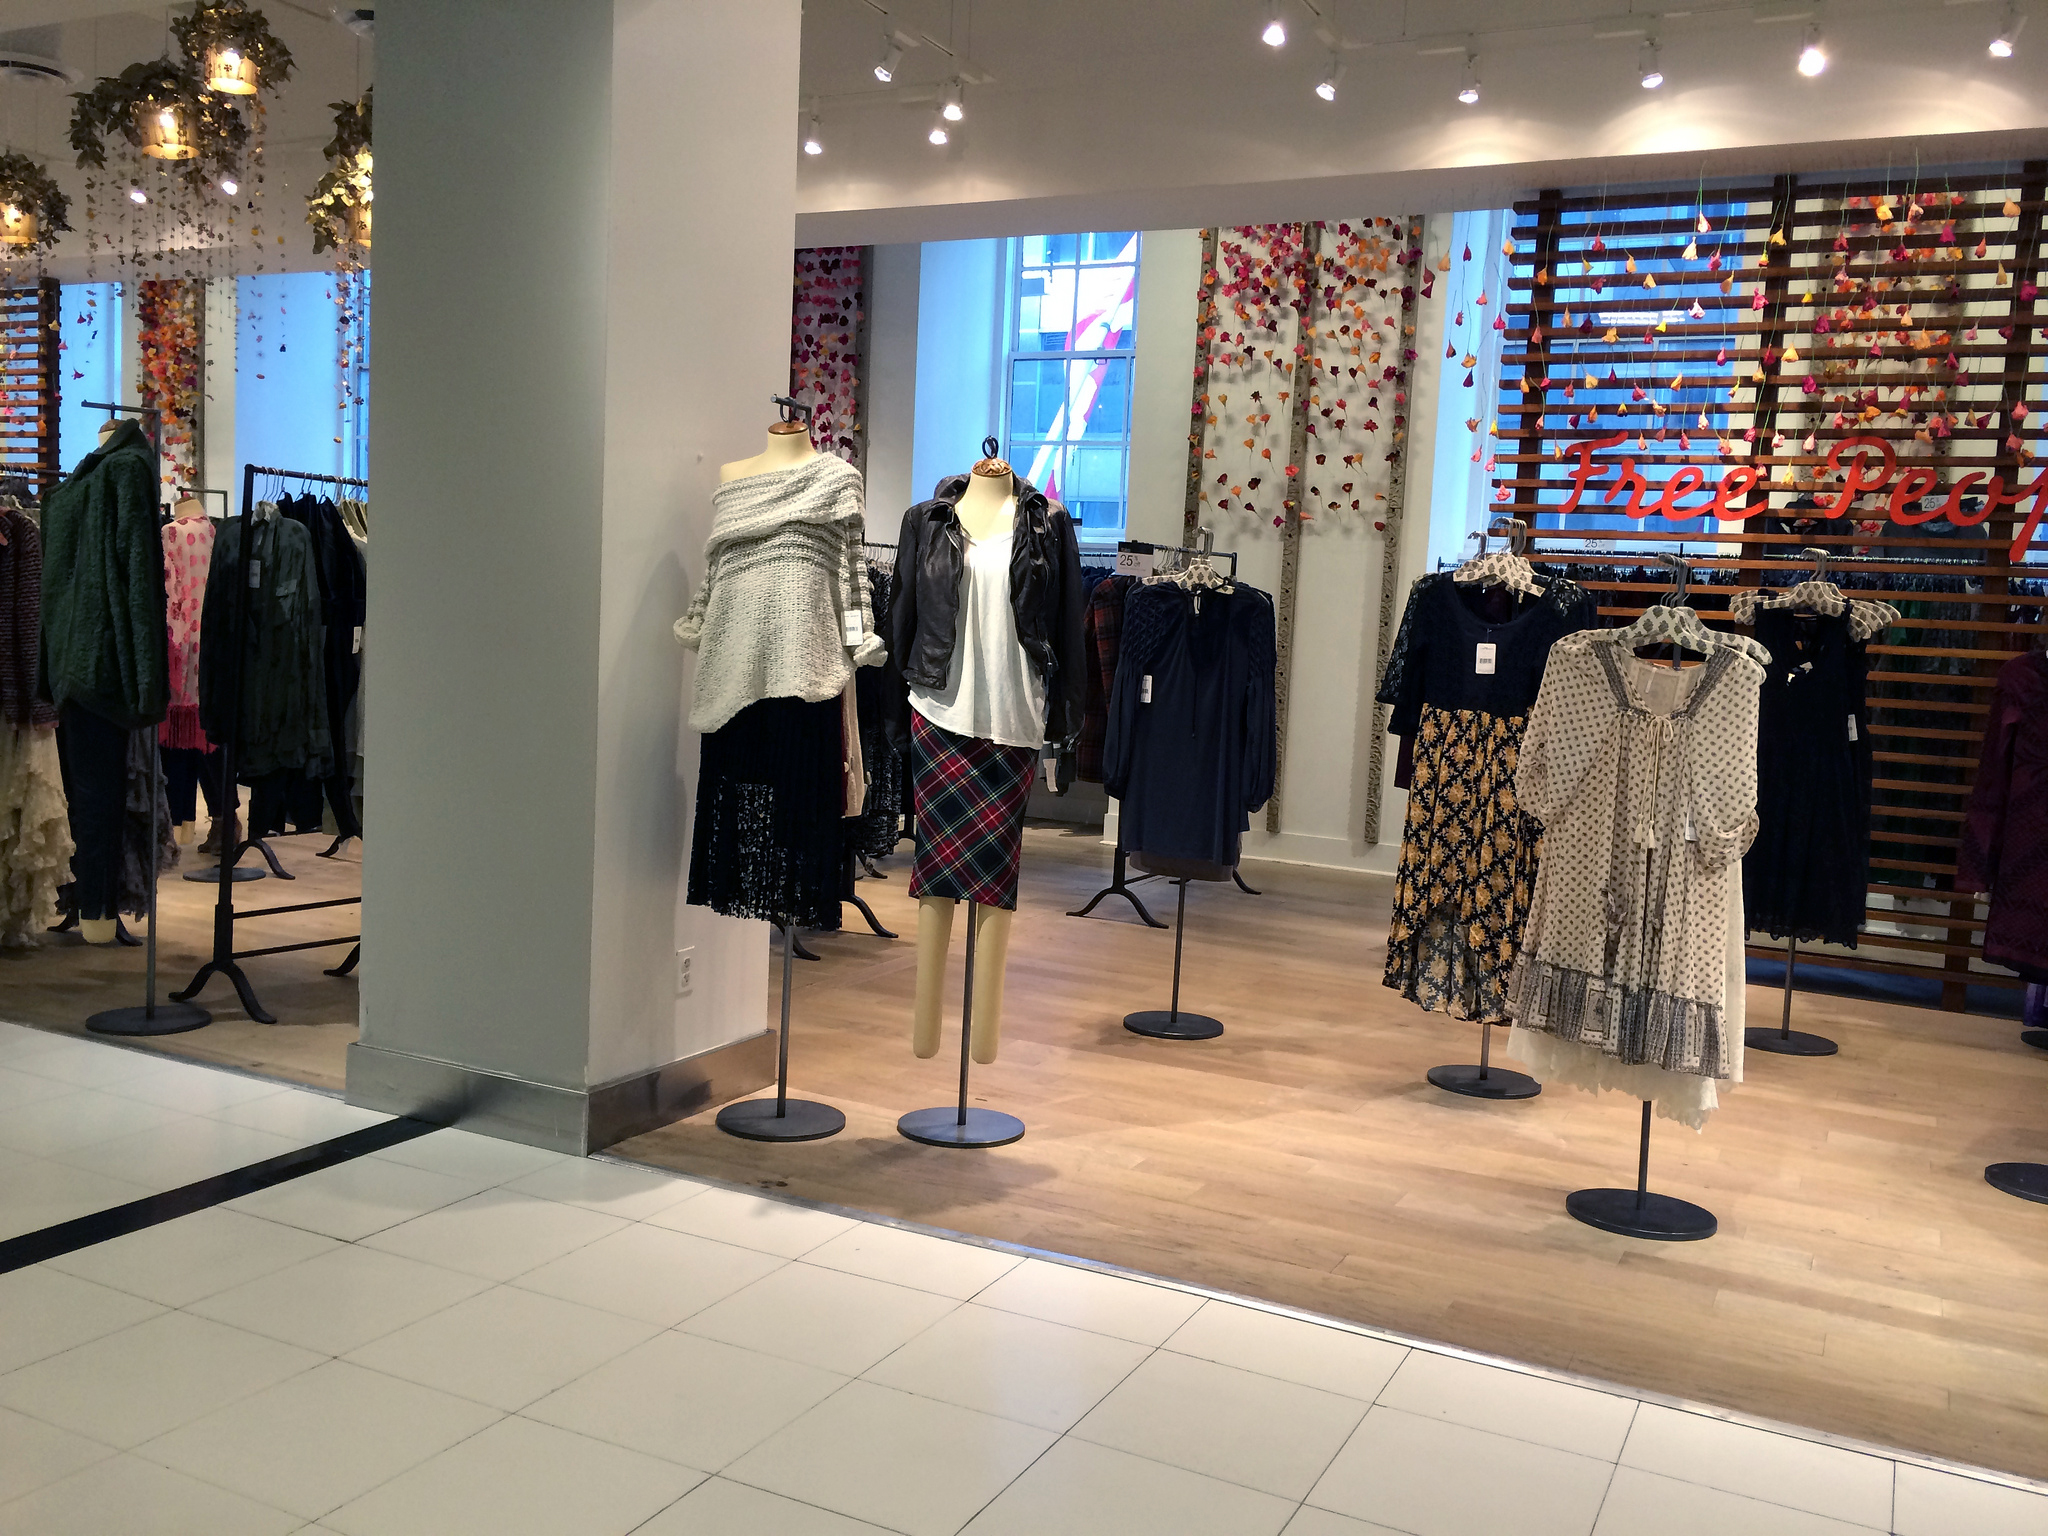 Free People fashion display at Bloomingdale's in New York. Photo by alphacityguides.